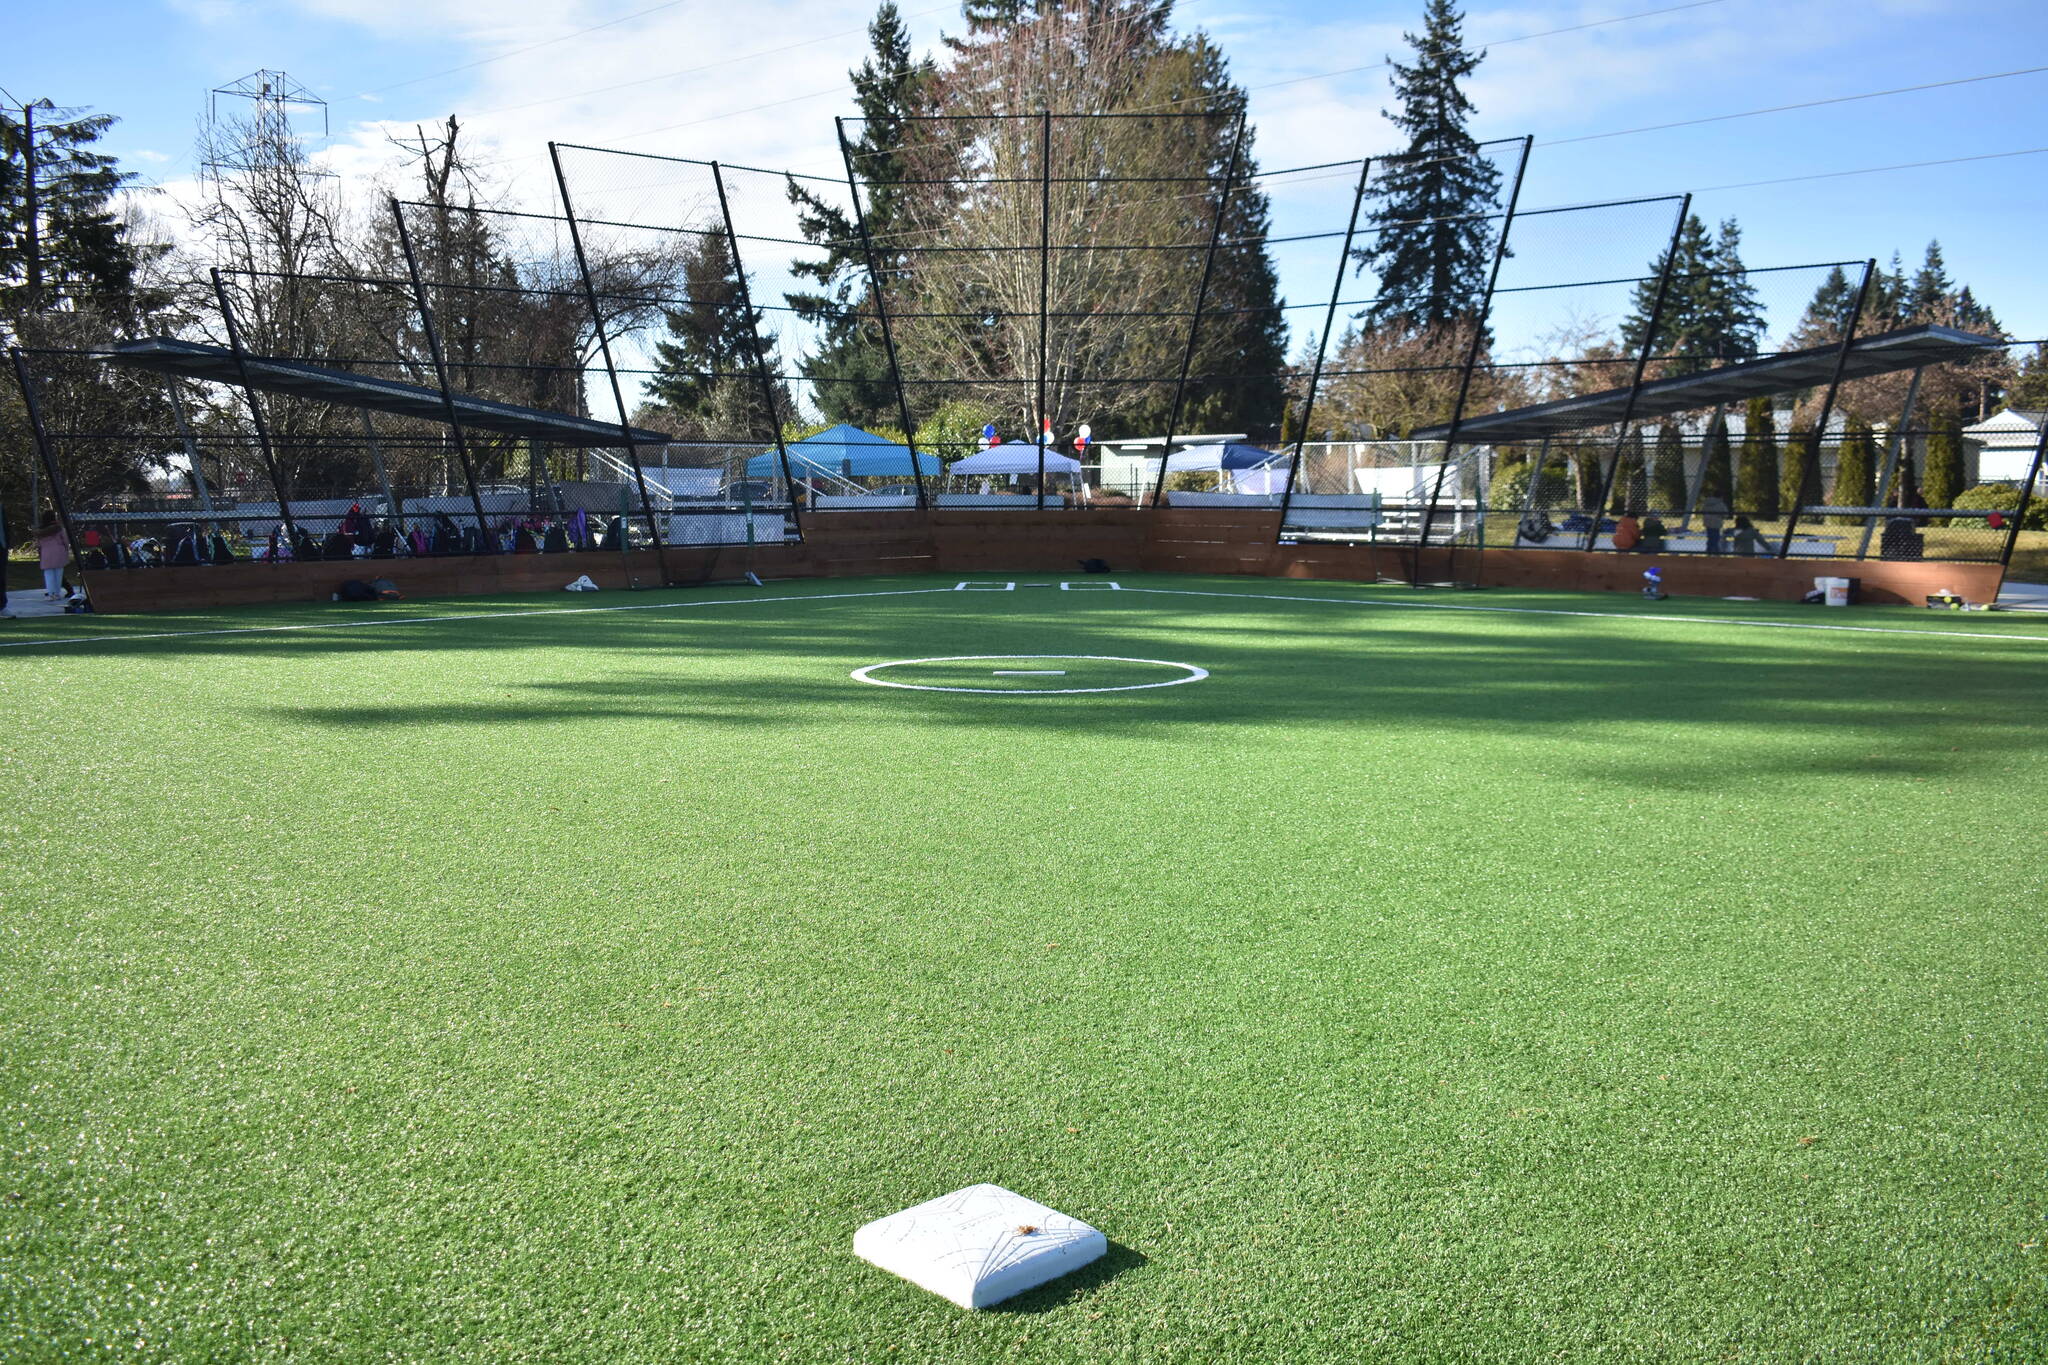 Kiwanis Park renovation includes new turf, dugouts and backstop. The park is located at 815 Union Ave. NE in the Renton Highlands. Ben Ray / The Reporter